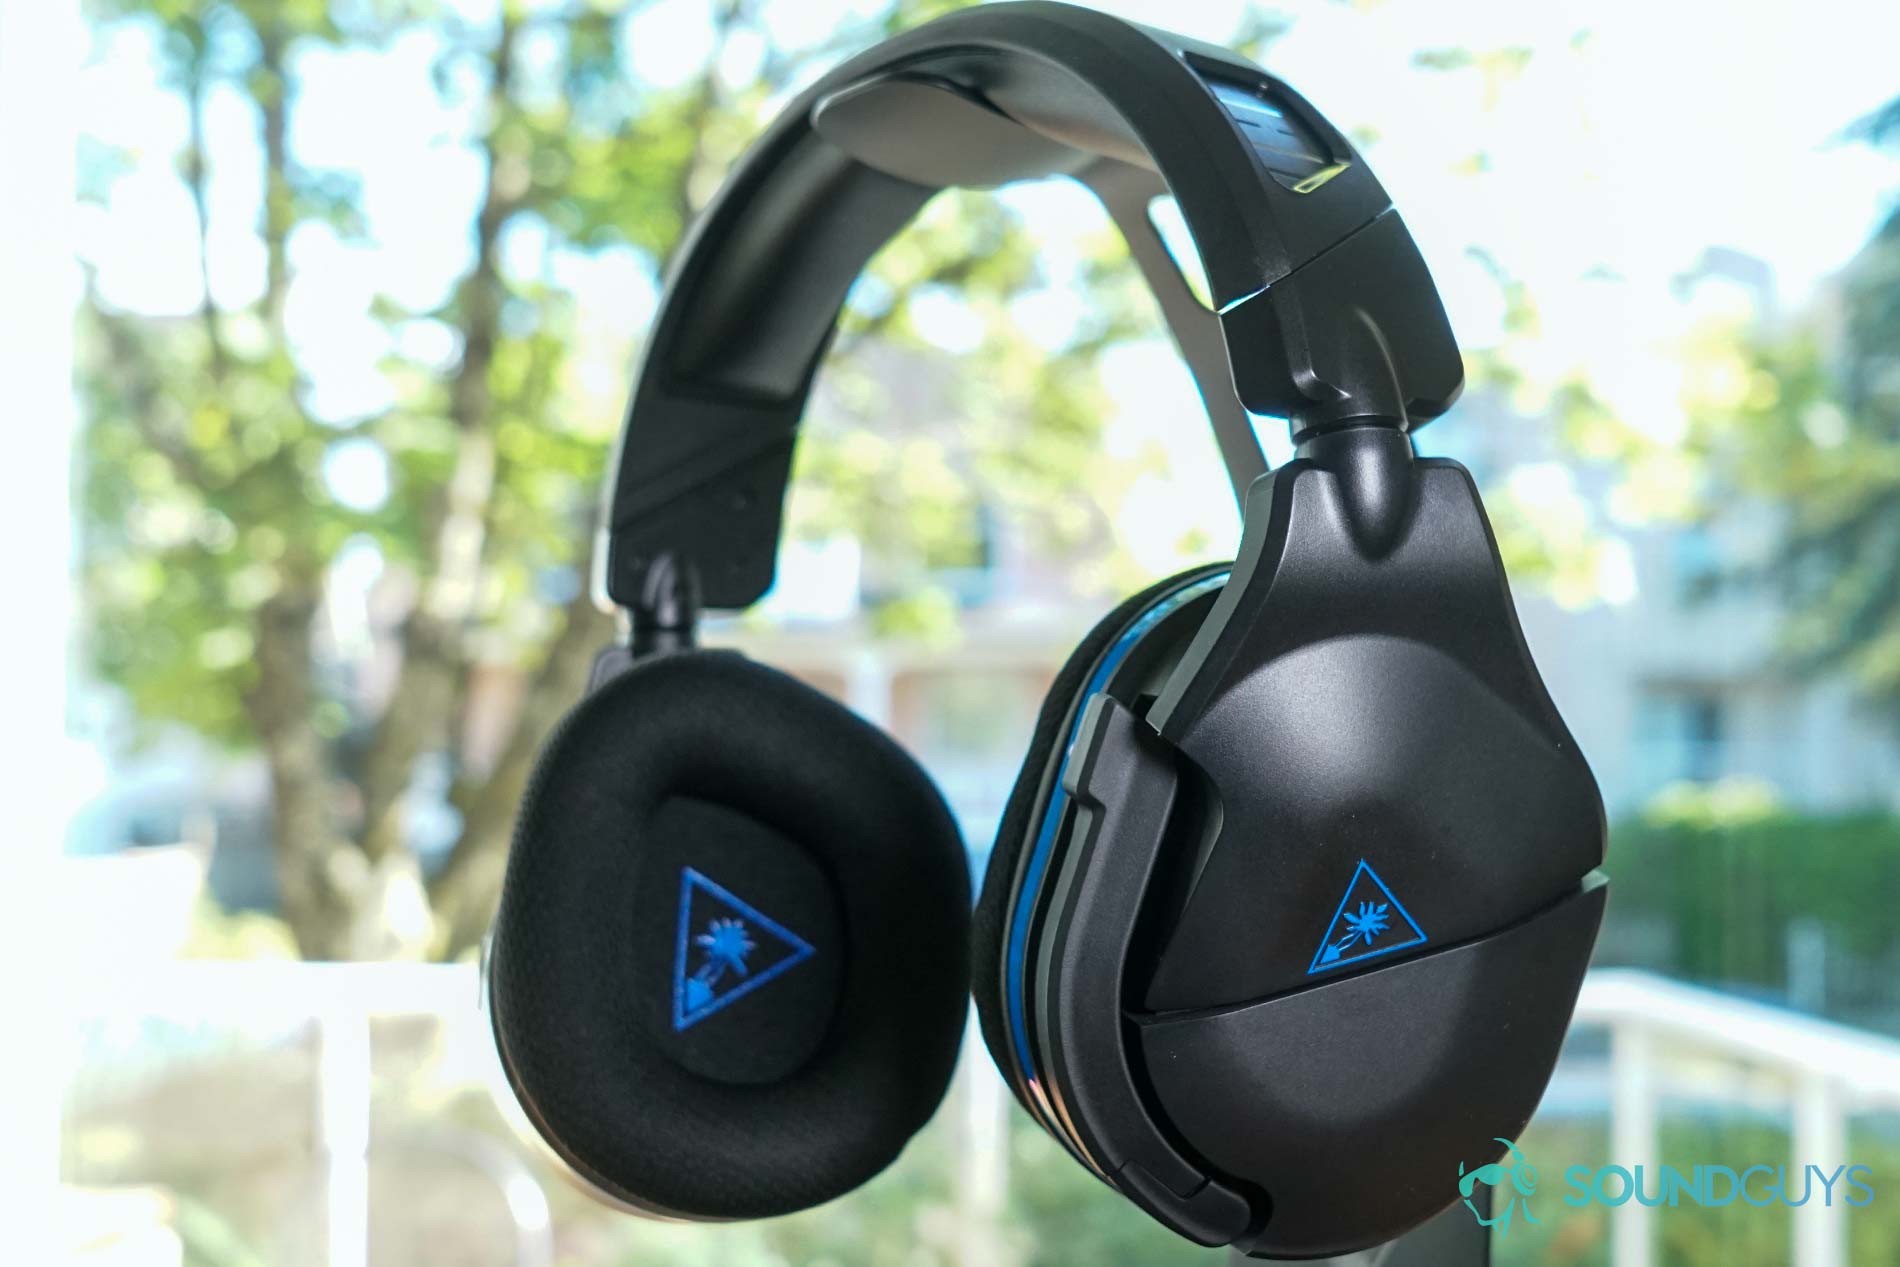 Connect a Turtle Beach Stealth 600 to PC